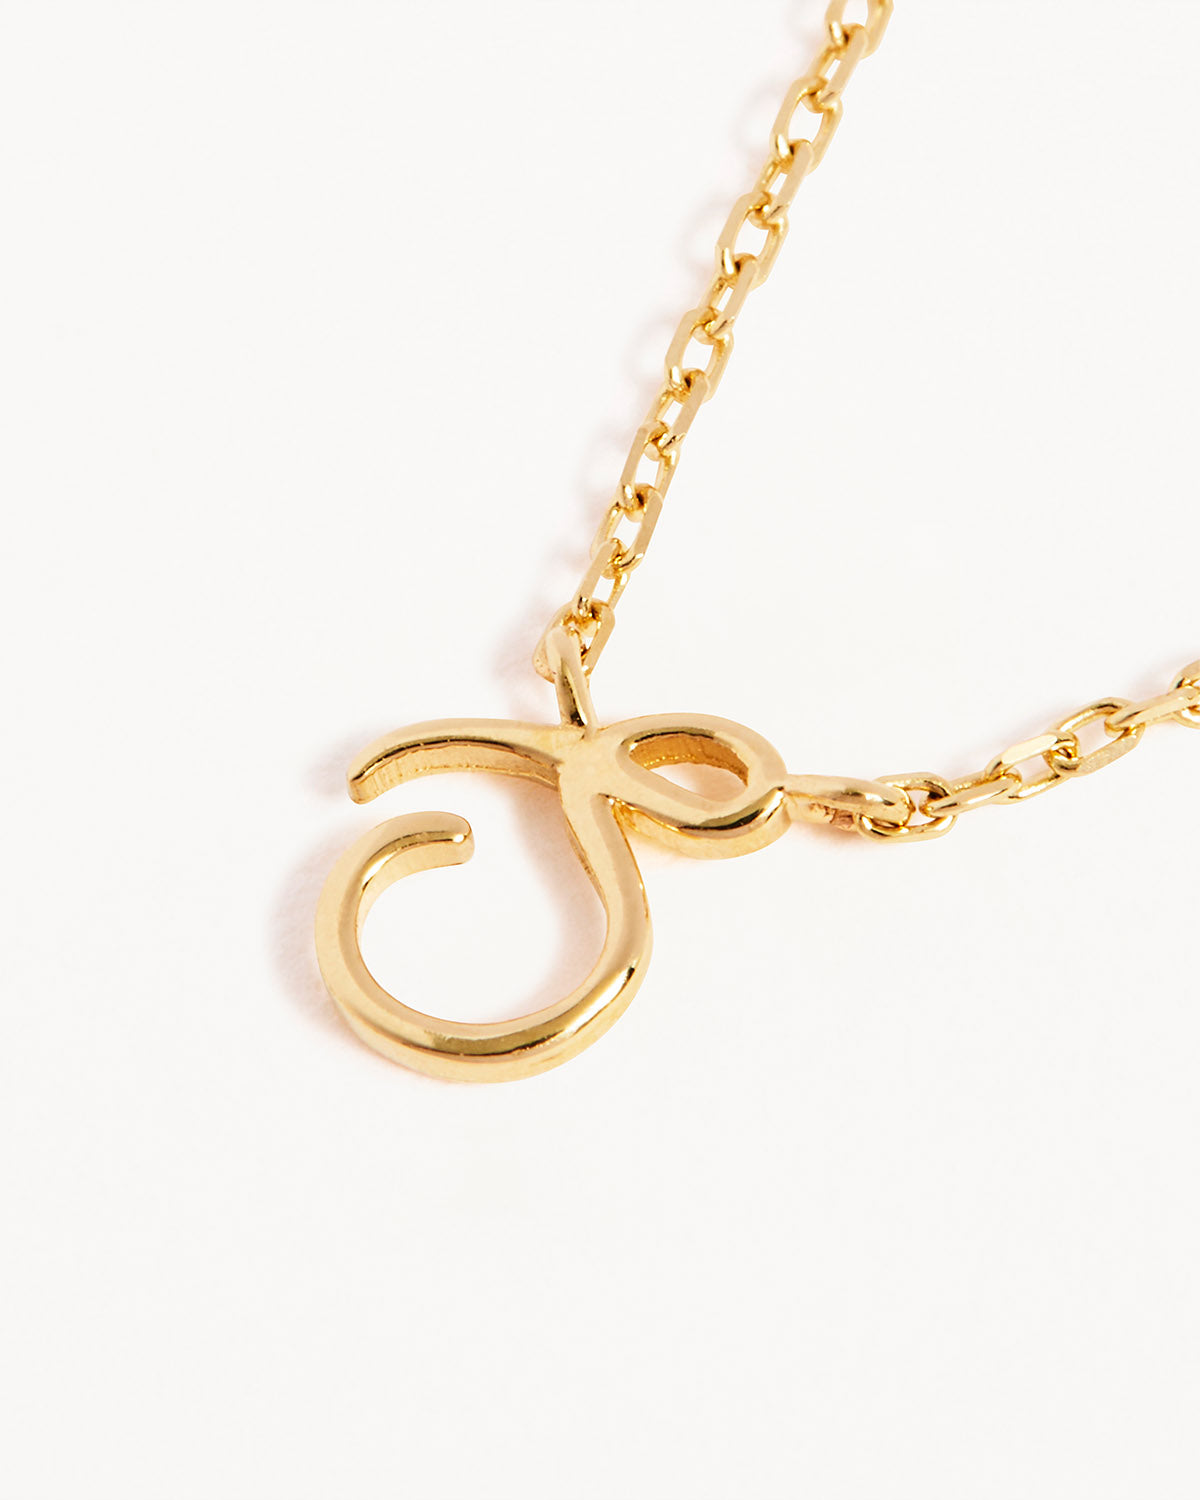 Big Initial G Necklace in 18k Gold Plating over 925 Sterling Silver |  JOYAMO - Personalized Jewelry